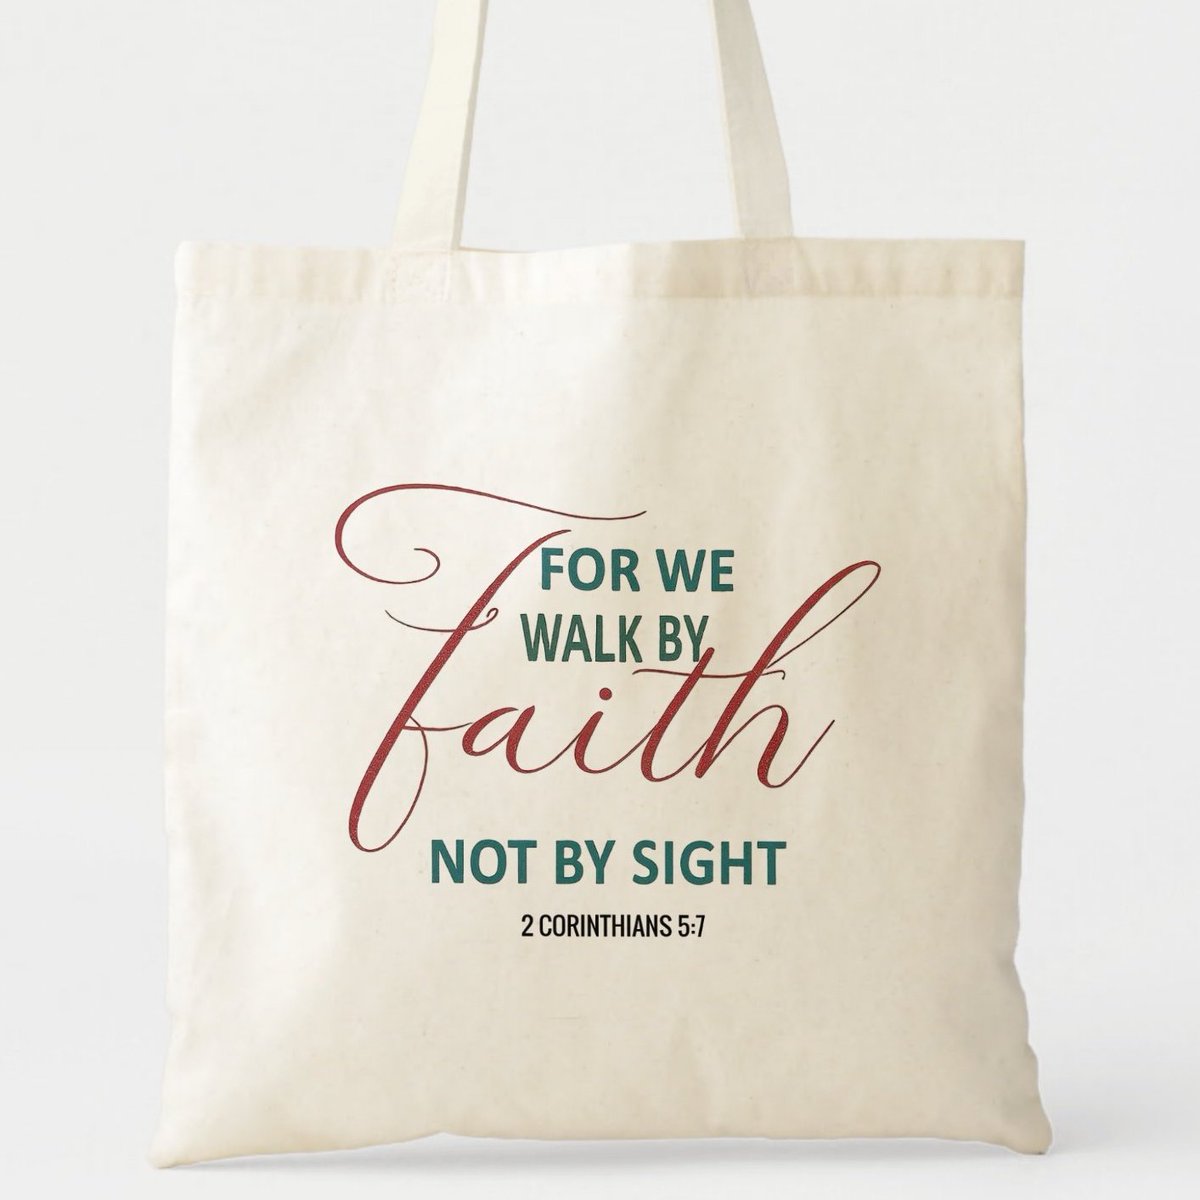 Our Trust In God's Guidance And Provision Tote Bag zazzle.com/faith_over_sig…  Trust In God's Plan #grace #JesusChrist #JesusSaves #hope #god #christian #spiritual #uniquegift #giftideas #MothersDayGifts #giftformom #giftidea #HolySpirit #totebag #totebags #giftsformom #giftforher